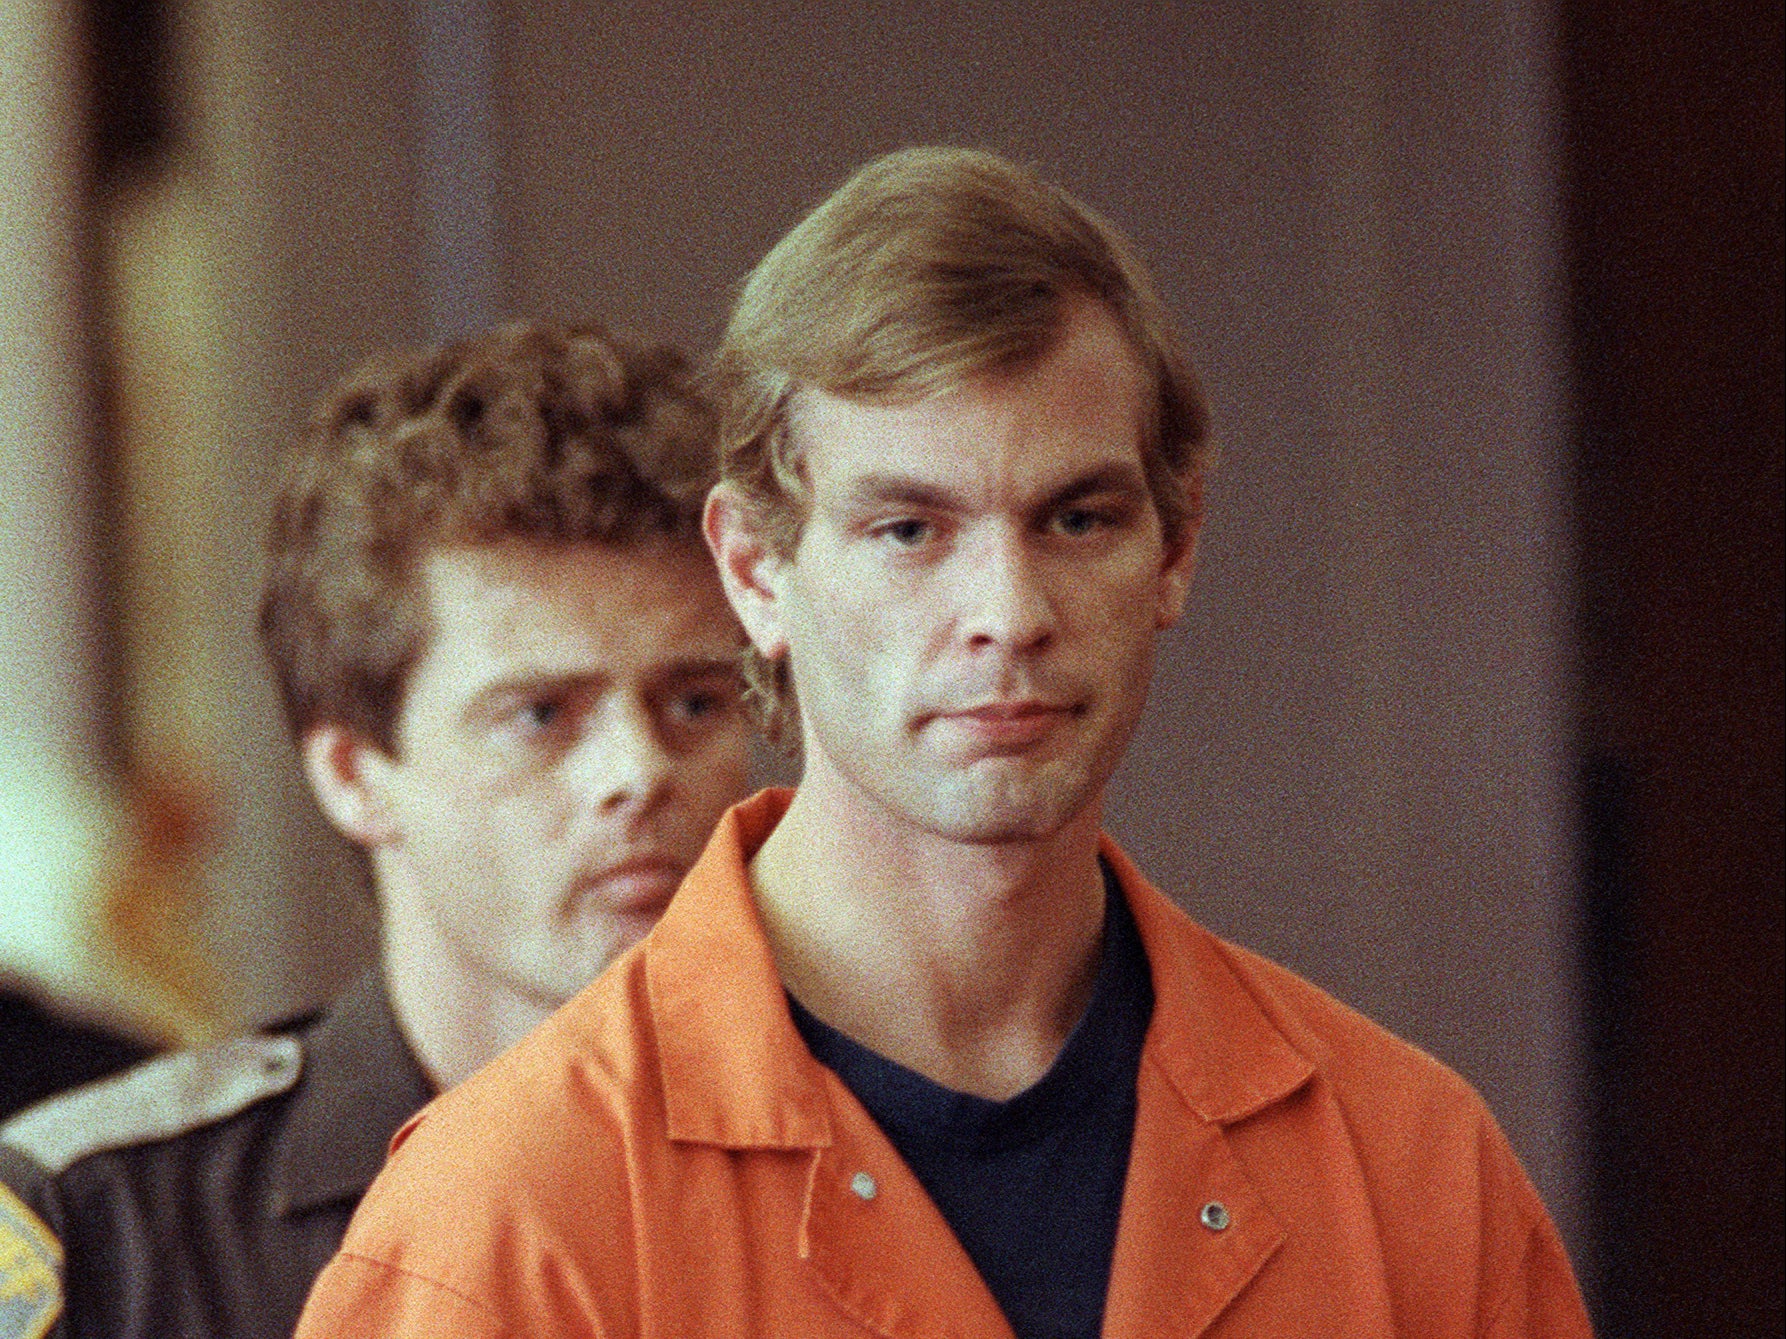 Pics Of Jeffrey Dahmer I broke the story of Jeffrey Dahmer in 1991. Here's what the Netflix series  got wrong | The Independent